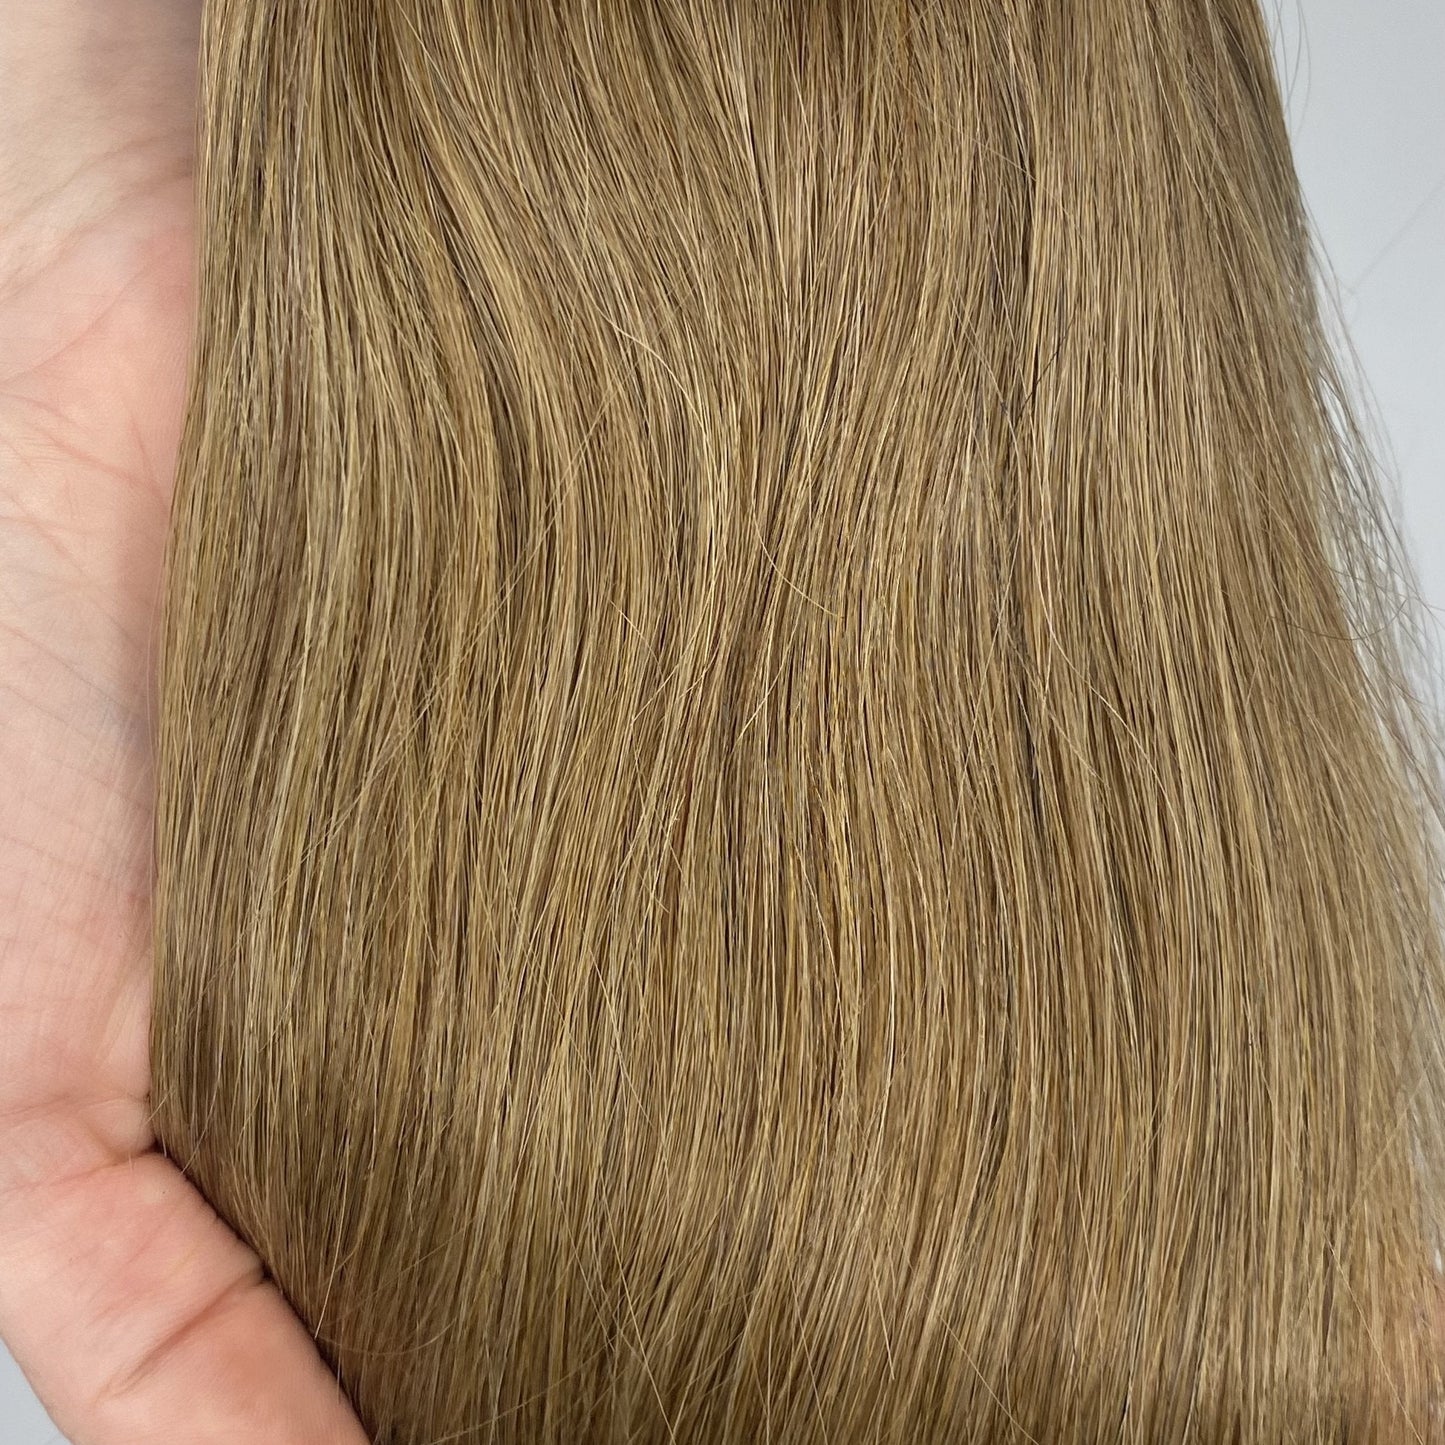 Velo #8 - 16 inches - Dark Blonde Velo DR Hair Products Co 